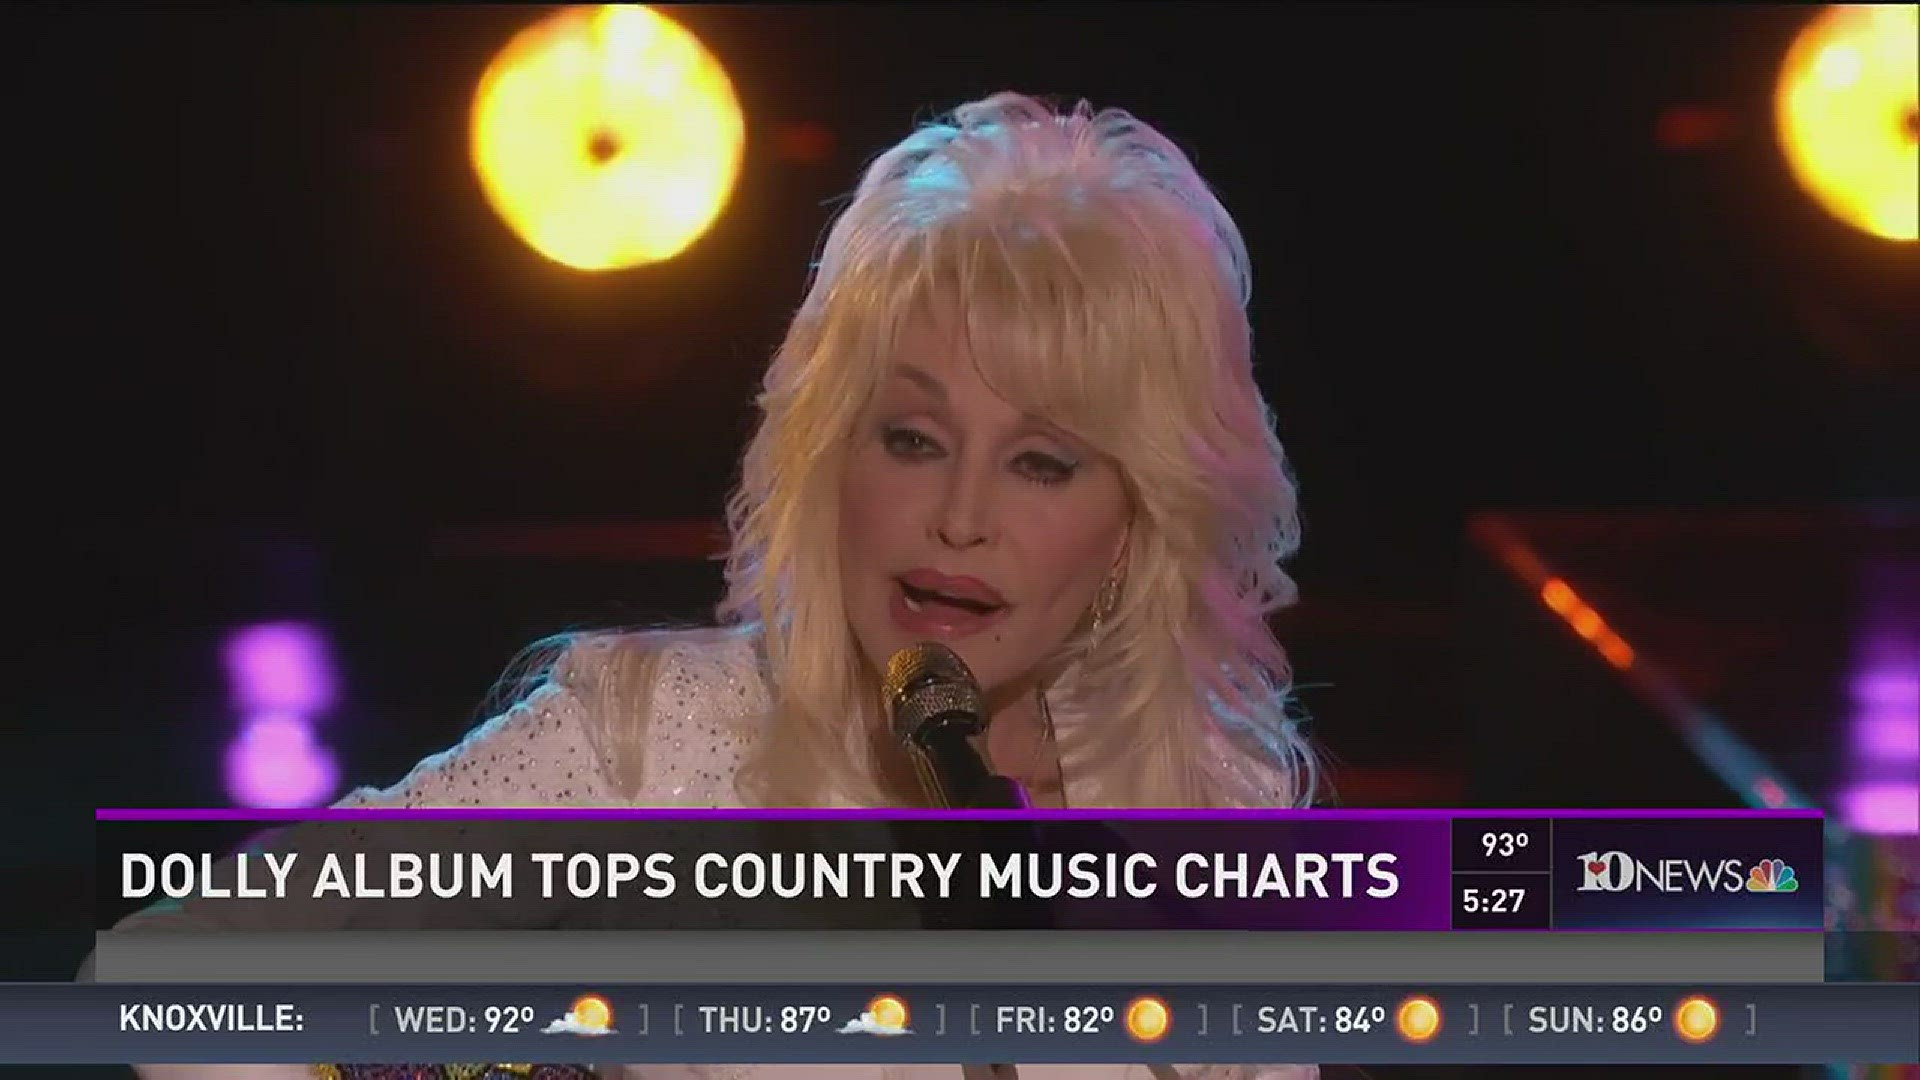 Dolly Parton tops country music charts for the first time in 25 years with new album